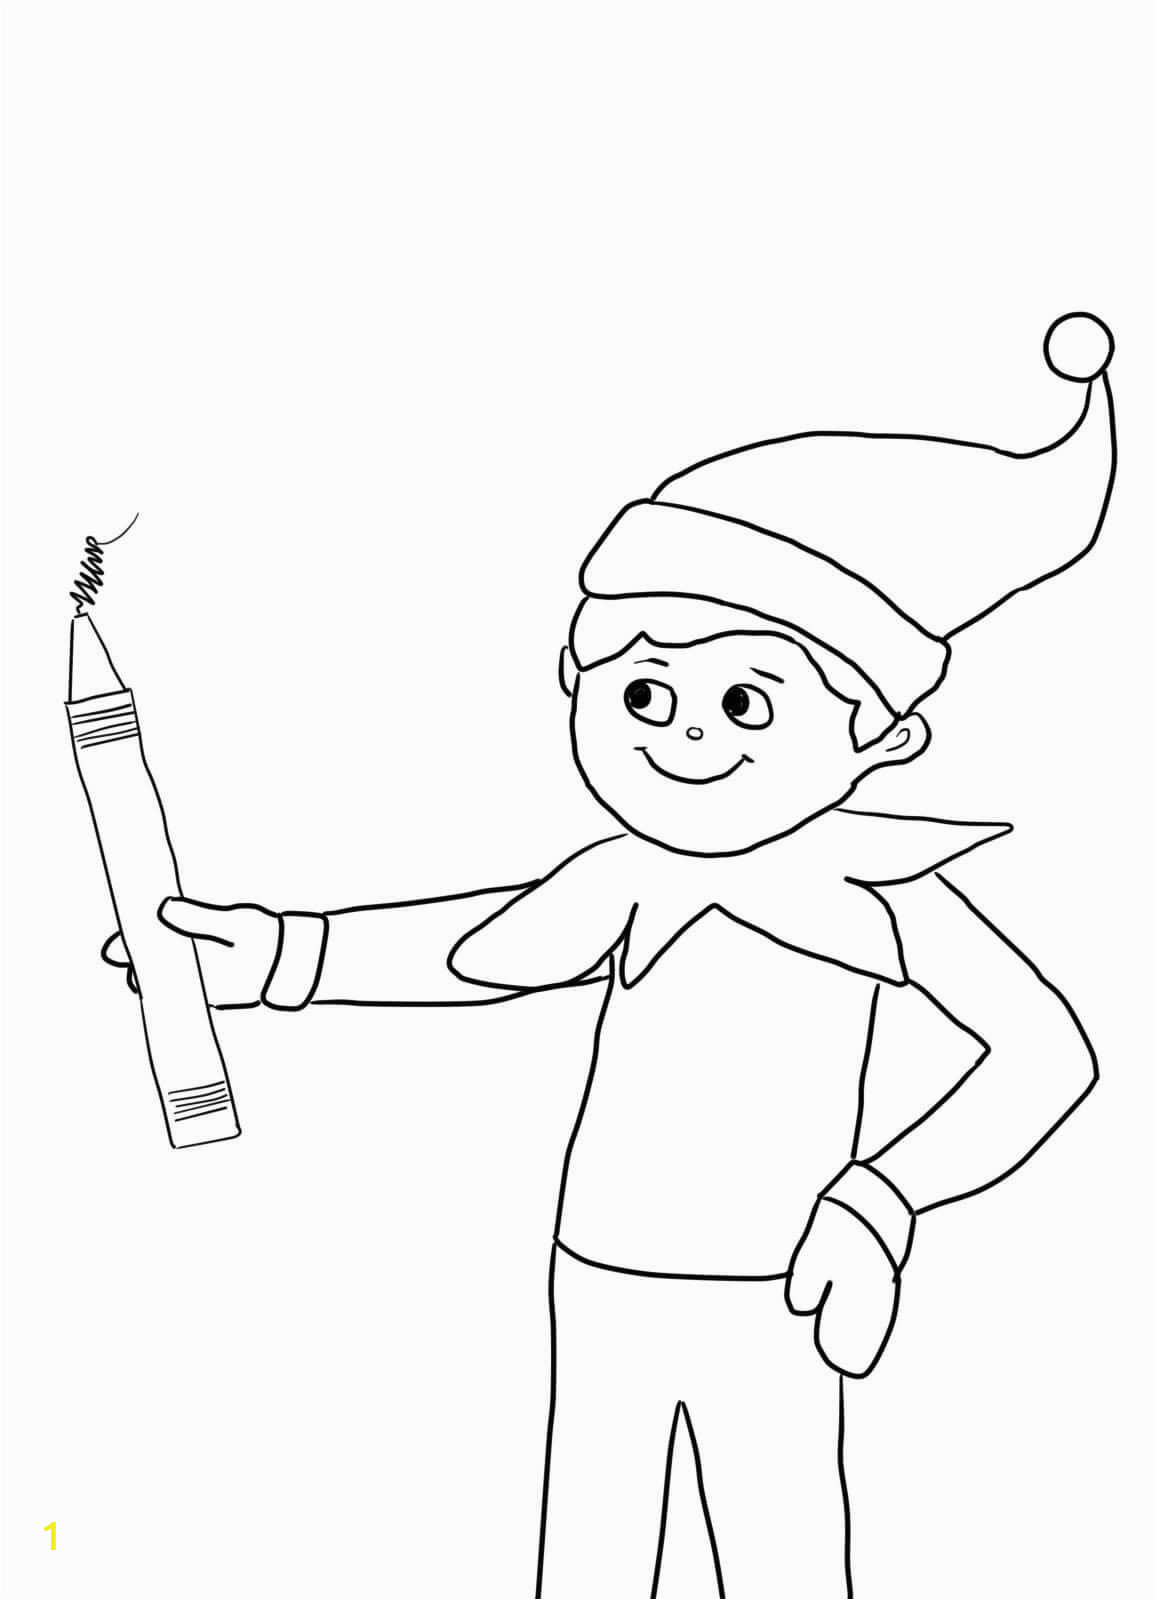 elf on a shelf coloring pages